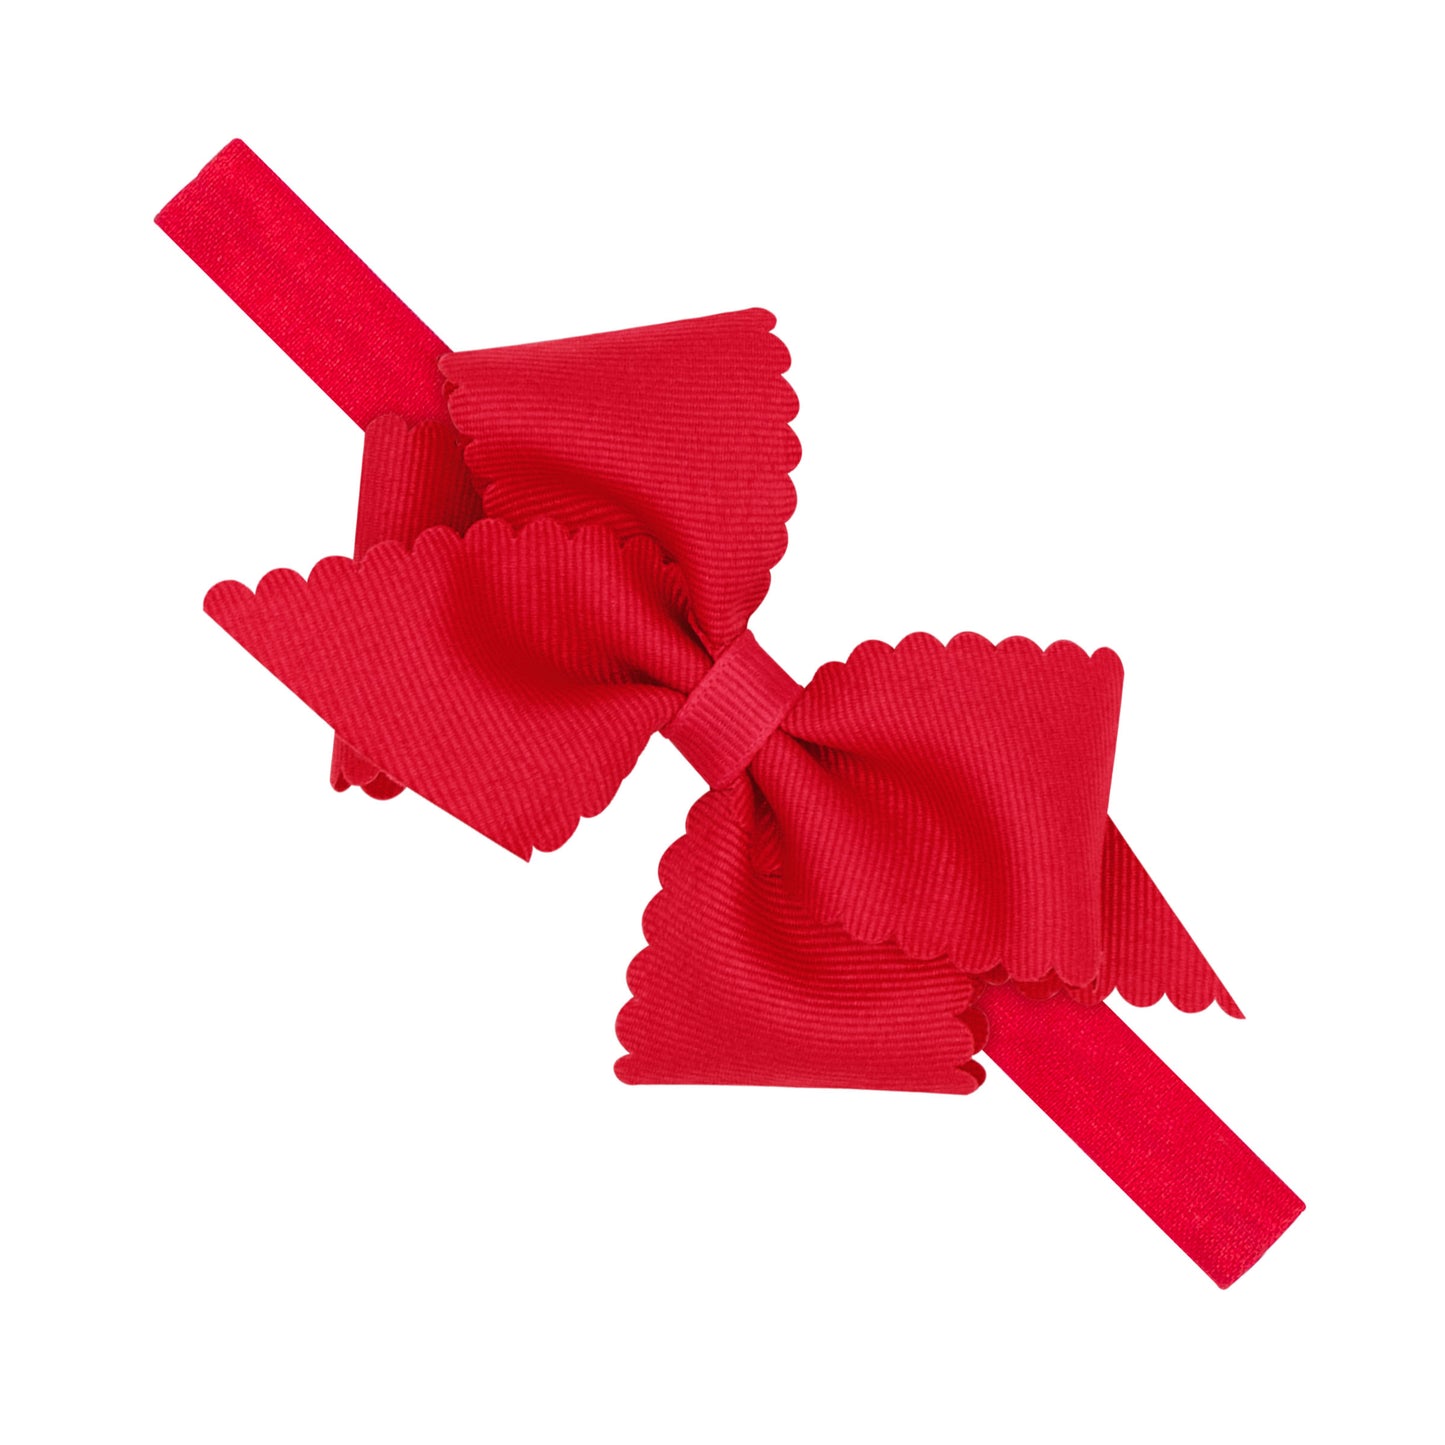 X-Small Scallop Grosgrain Bow on Band Kids Hair Accessories Wee Ones Red 0-6m 